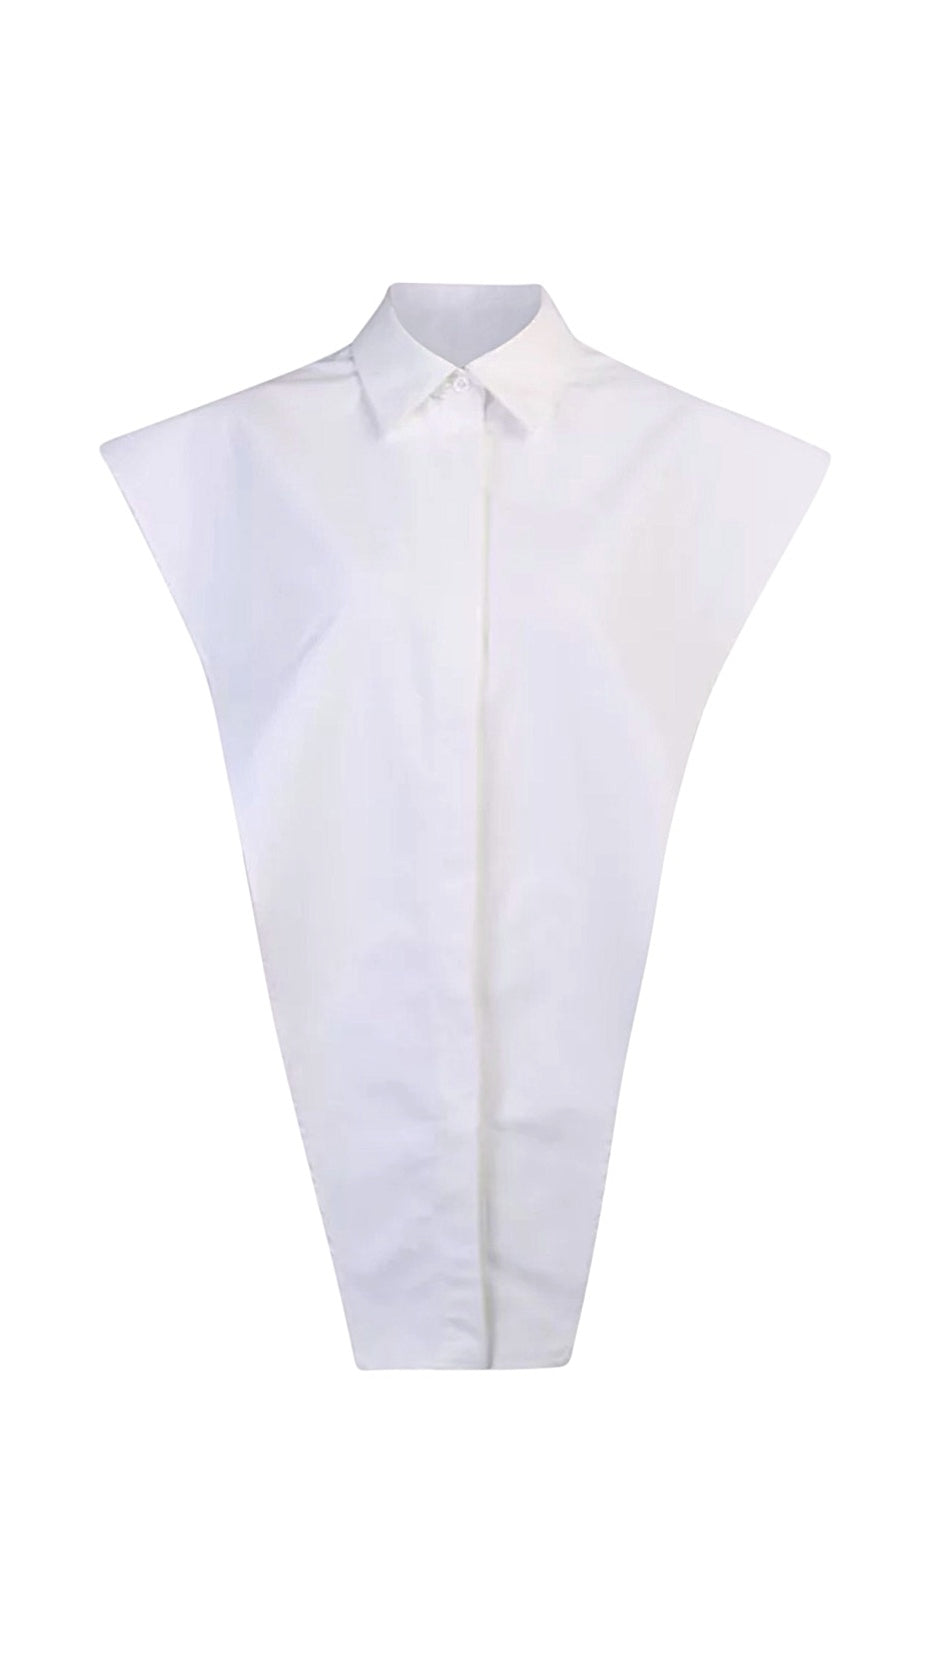 triangle top, sleeveless top, inverted triangle top, white plain top, women's button down top, women's button down , basic white button down, fly on the yacht triangle top